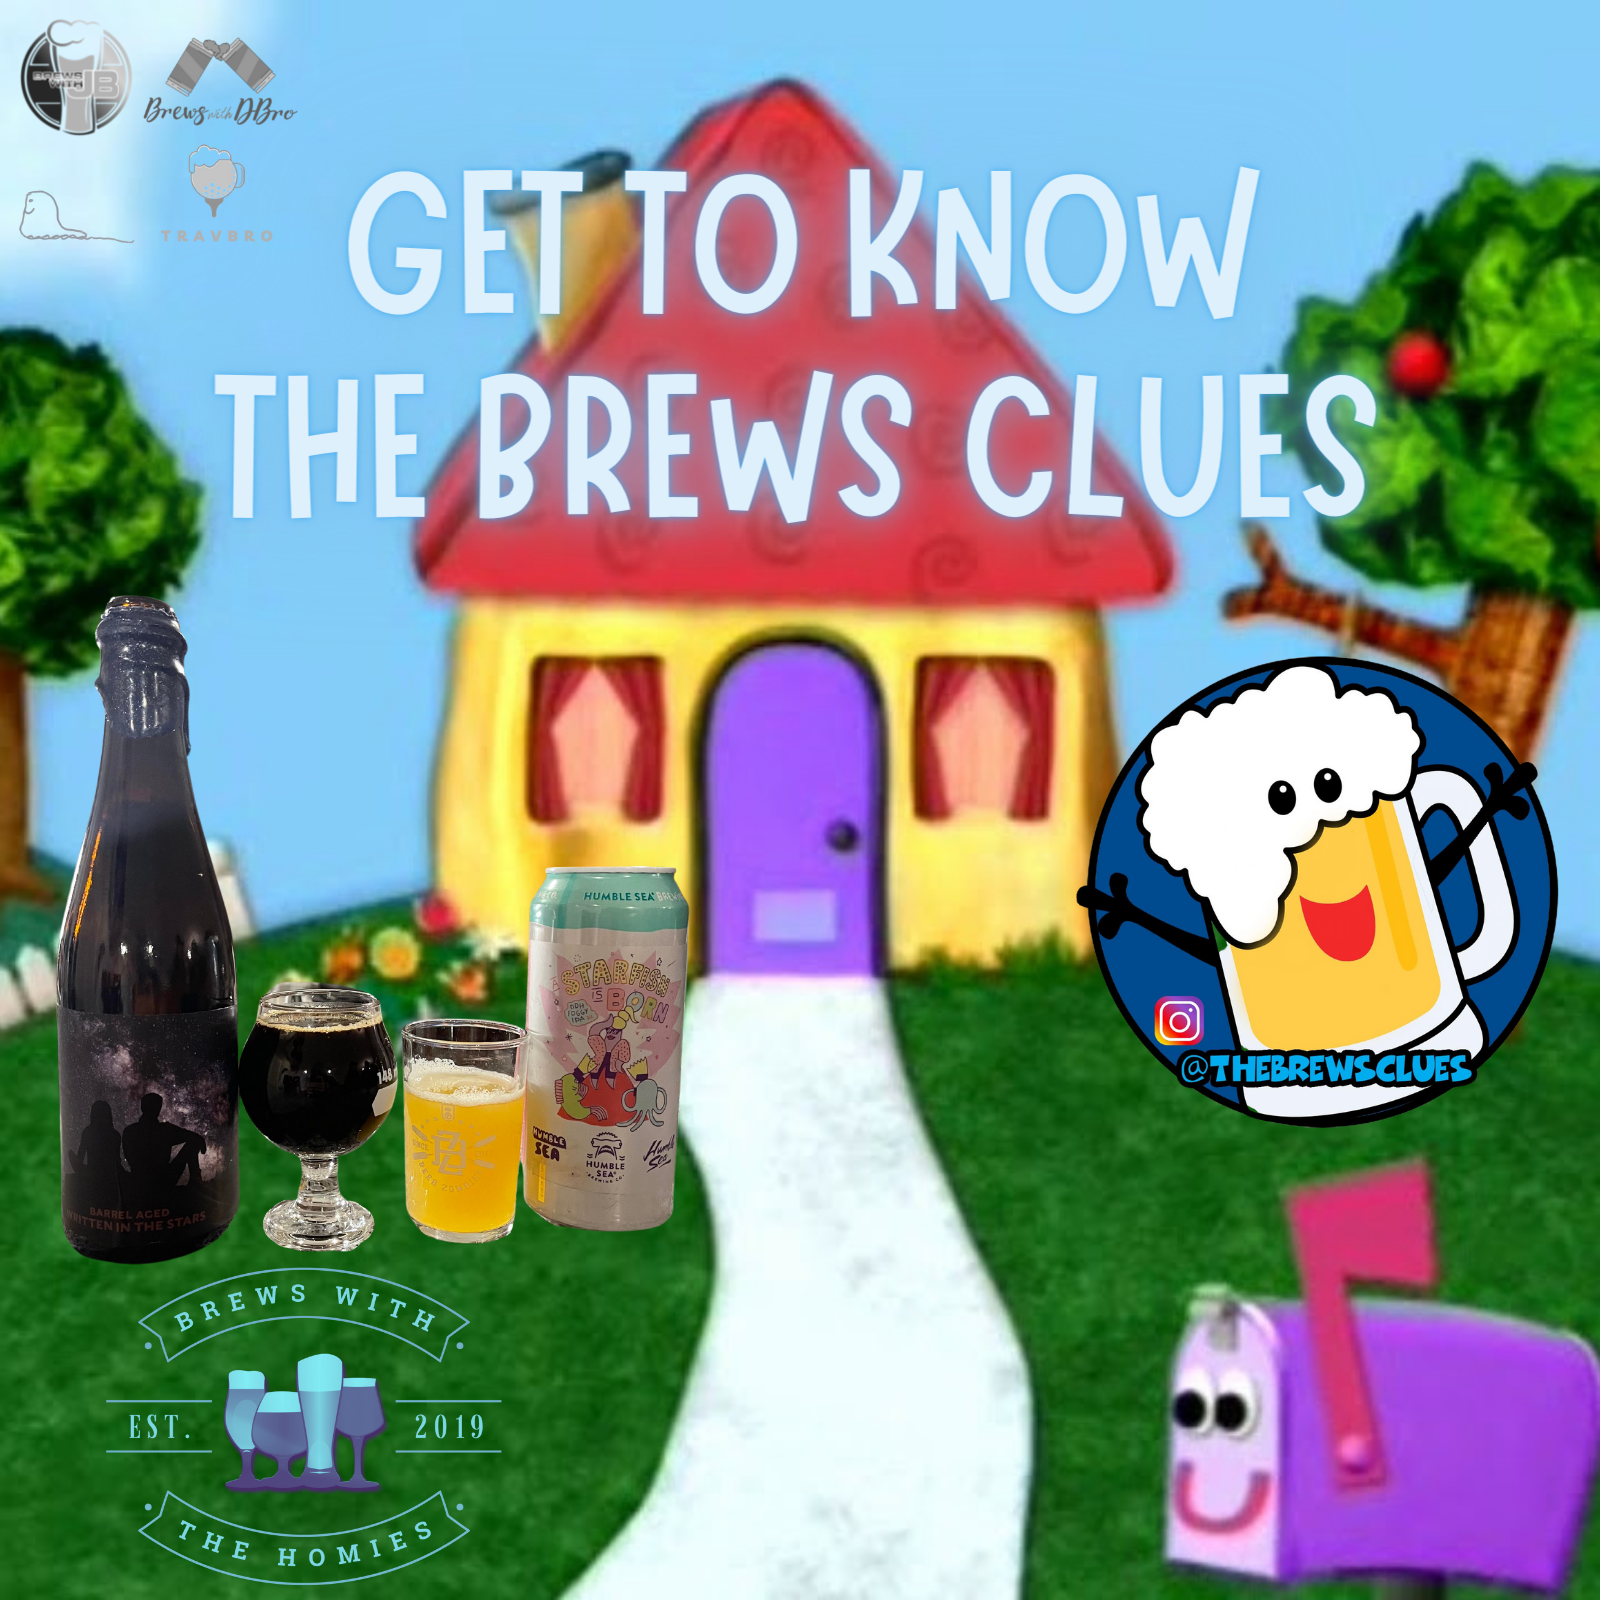 Get to know The Brews Clues